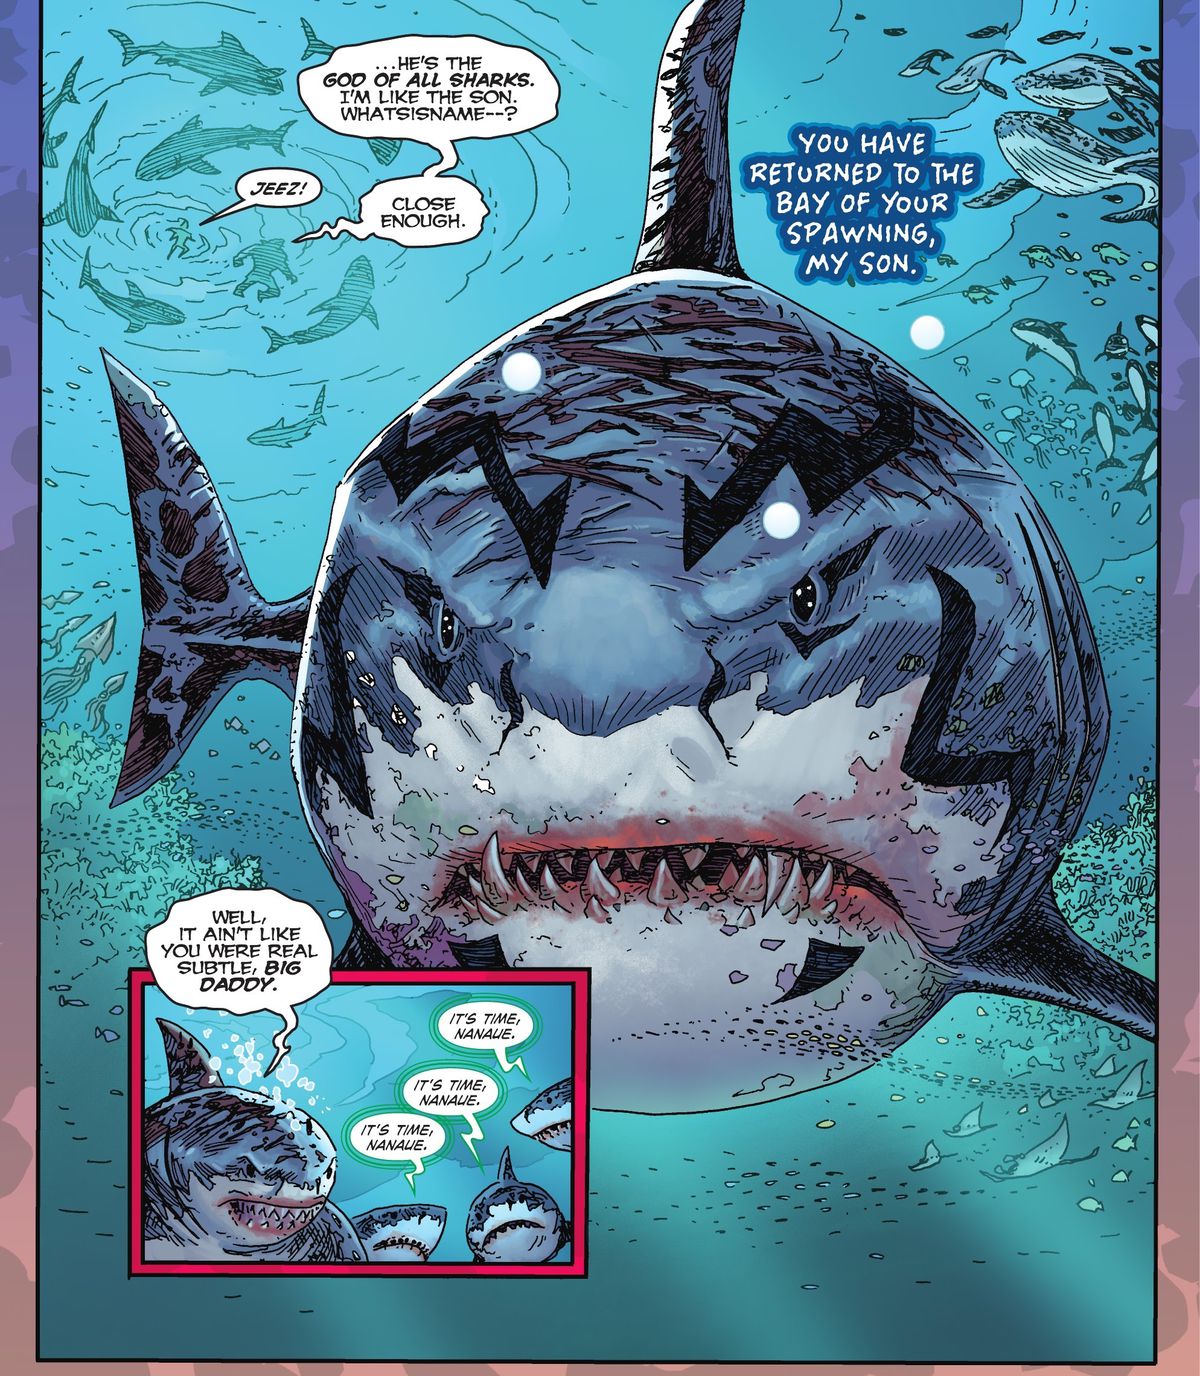 “He’s the god of all sharks. I’m like the son. Whatsisname—?” says King Shark, floating above his father, a titan-sized great white shark god covered in scars and striped markings. “Jeez!” says his human companion. “Close enough,” he replies, in Suicide Squad: King Shark #1 (2023). 